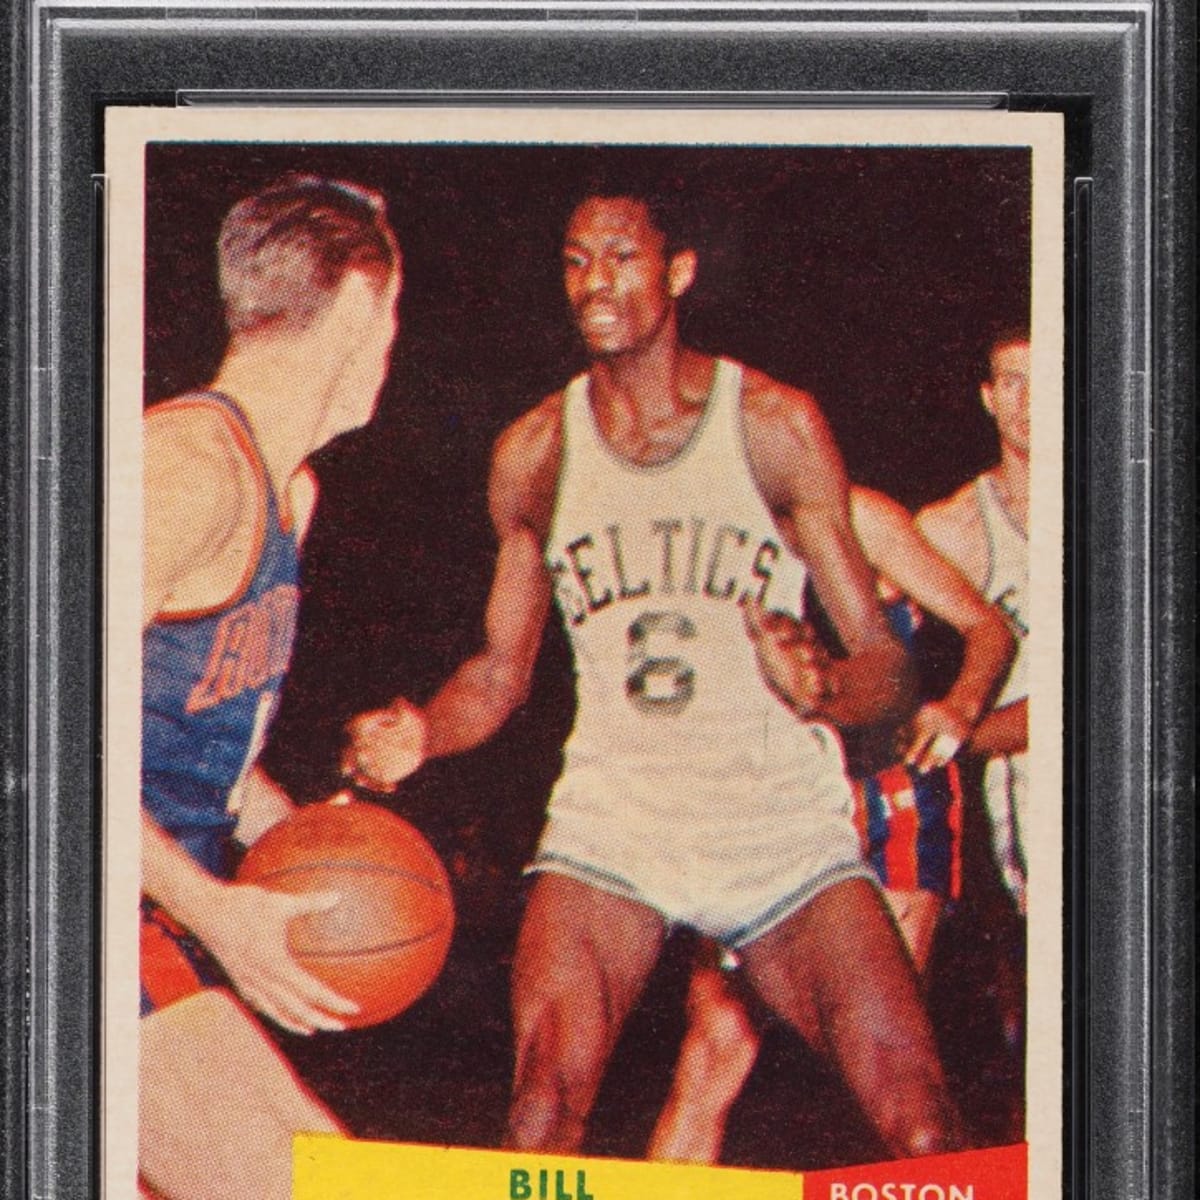 Bill Russell rookie card sets record at PWCC - Sports Collectors